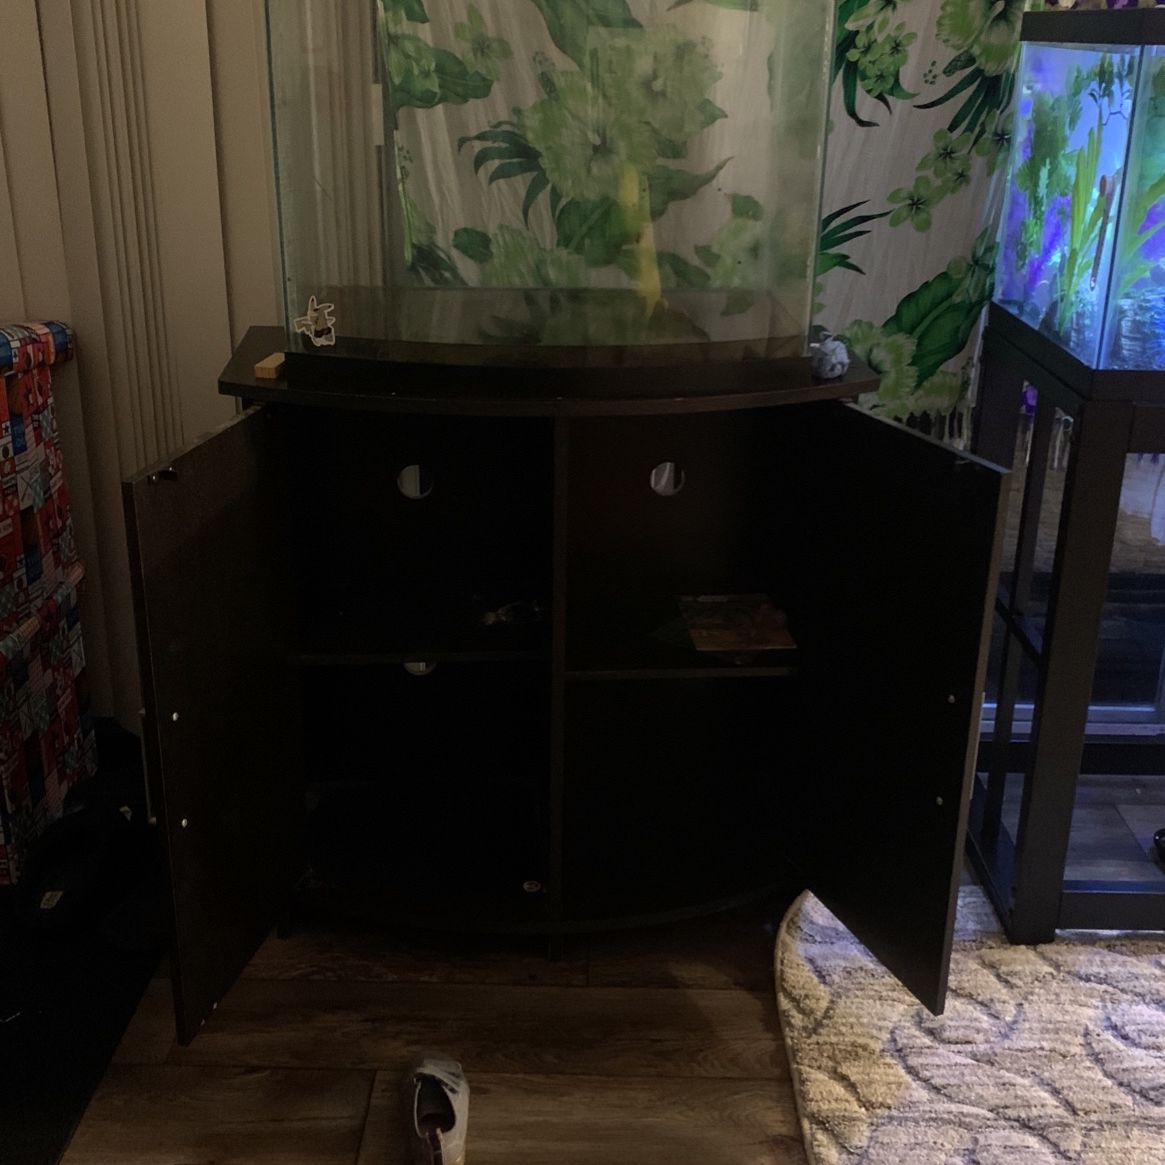 25-30G Fish Tank With Stand